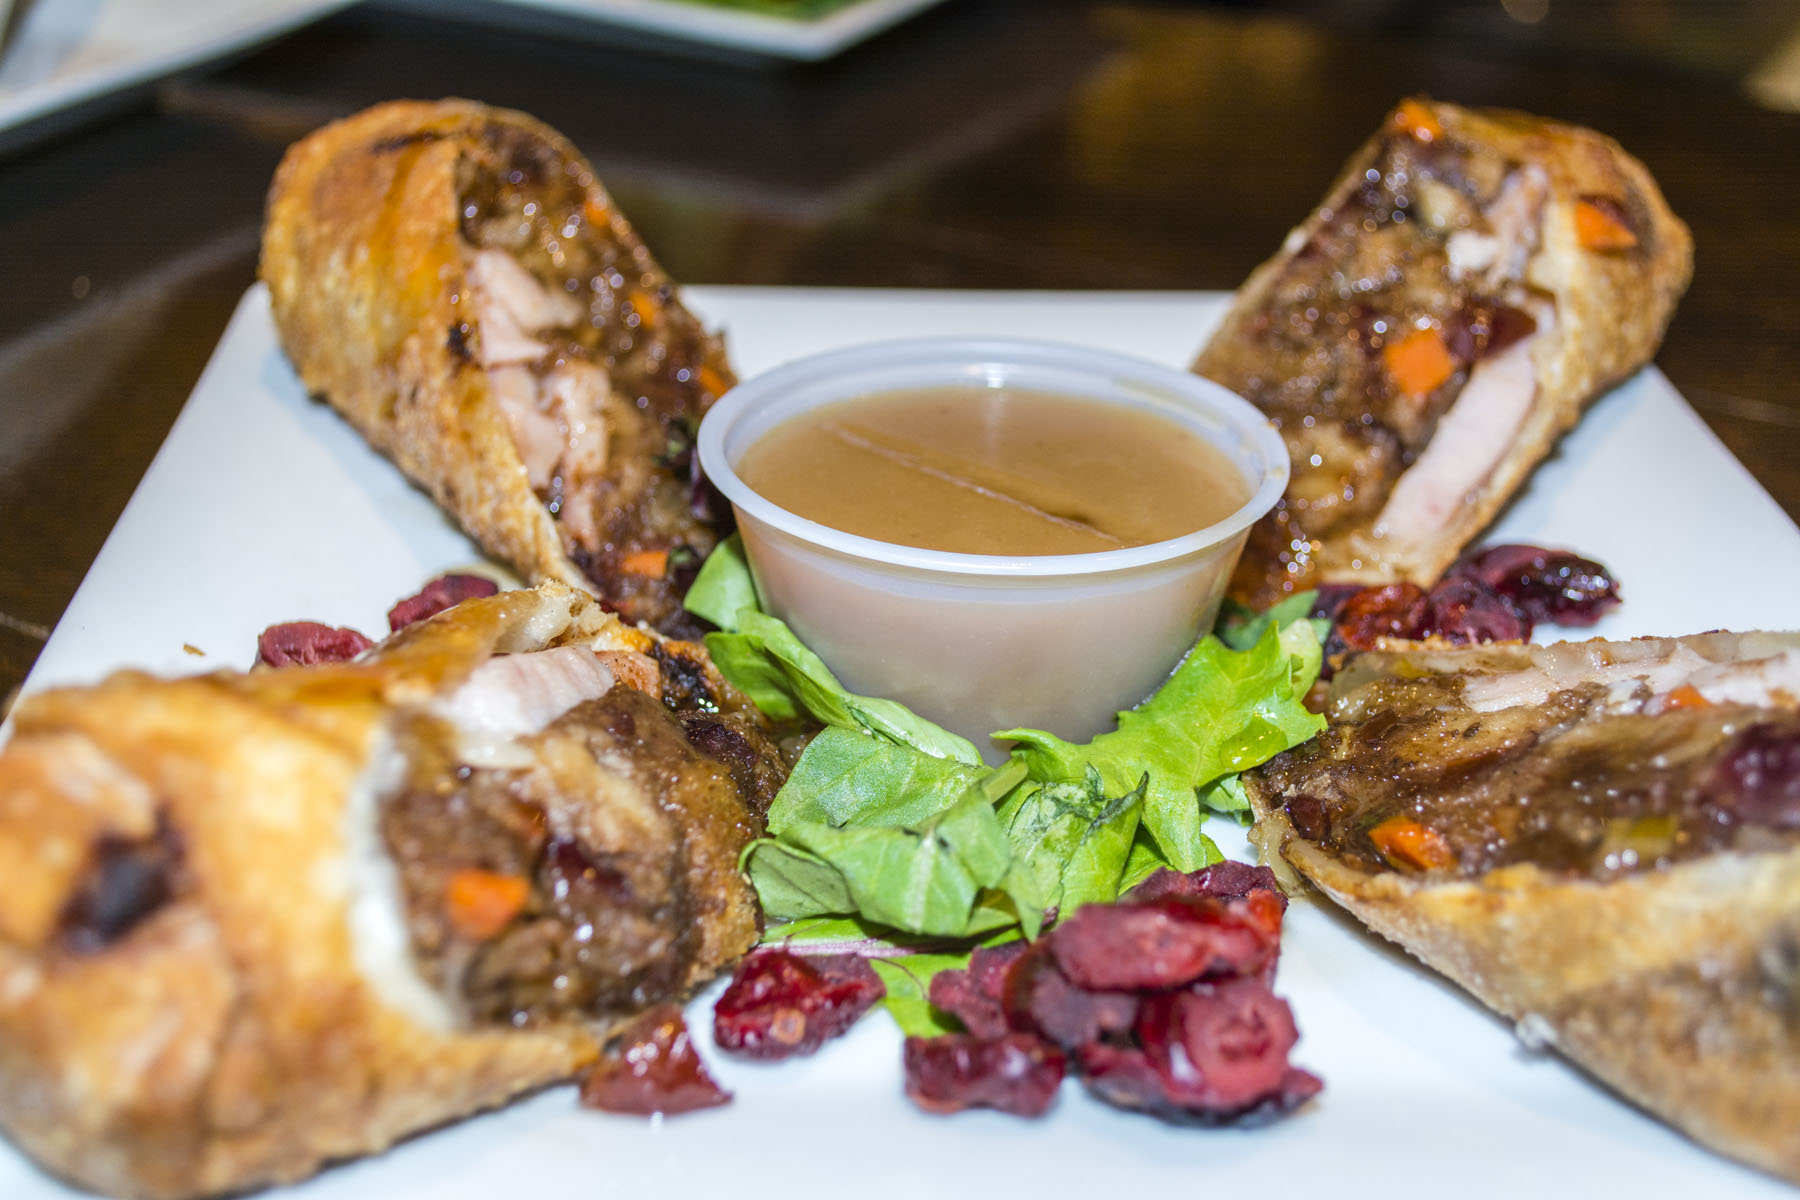   The Thanksgiving Egg Rolls ($9) is a large serving of roasted turkey and homemade stuffing wrapped in an egg roll with a maple honey glaze and gravy dipping sauce.  